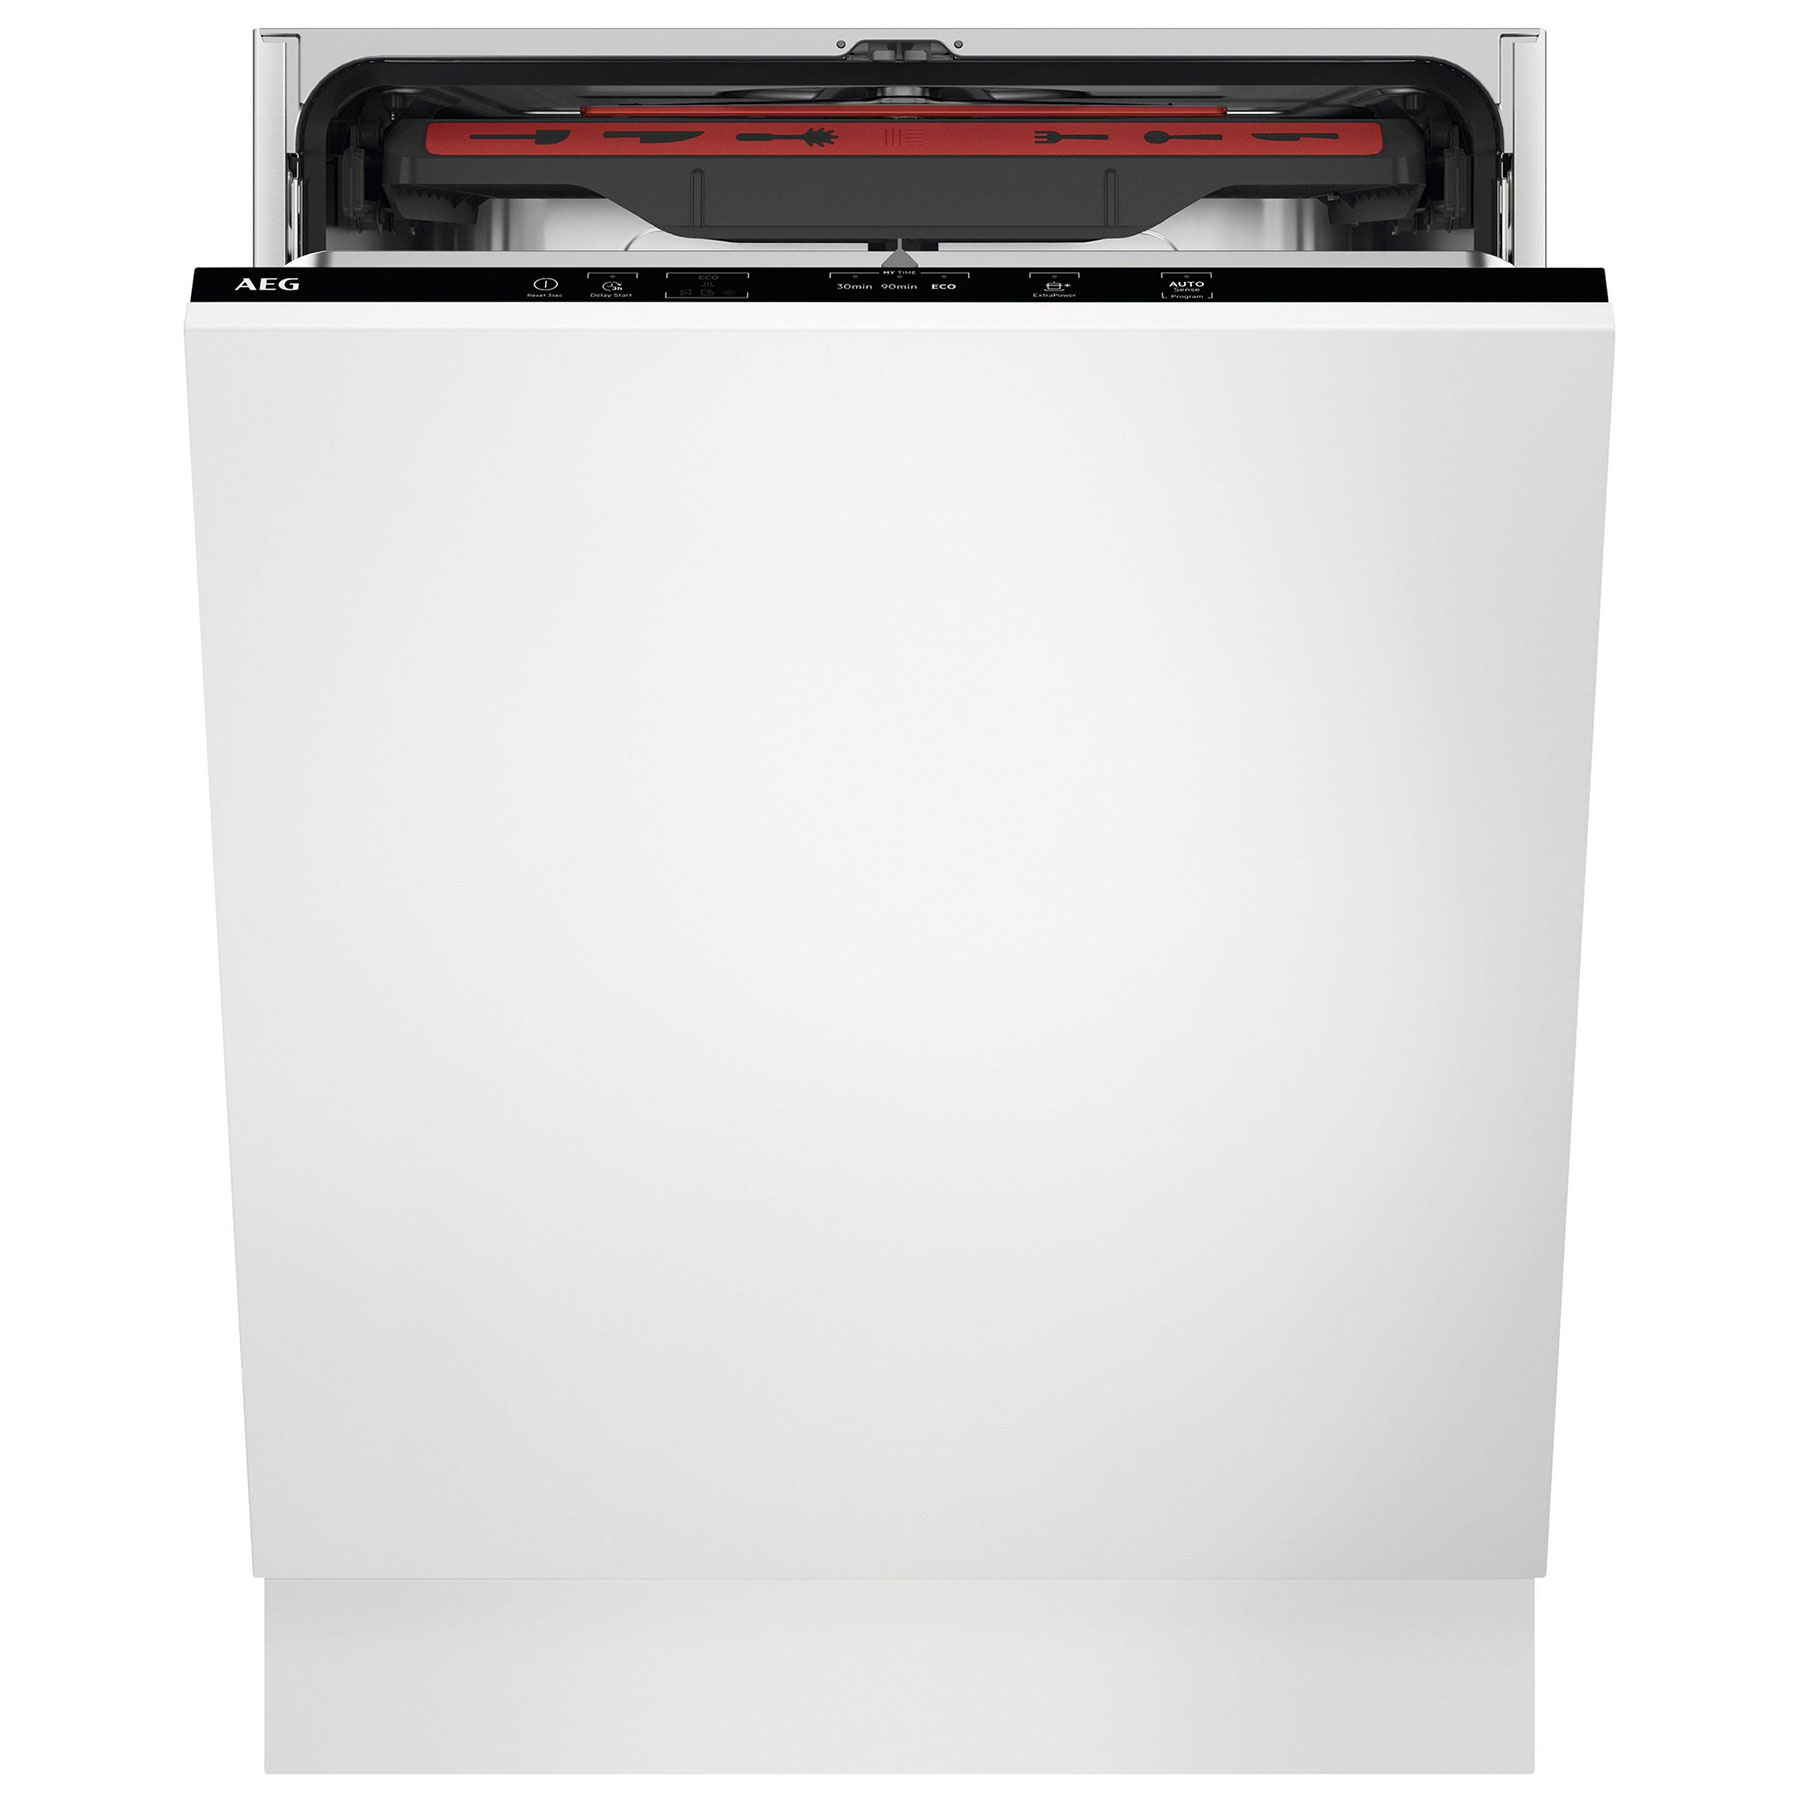 Image of AEG FSX52927Z 60cm Fully Integrated 14 Place Dishwasher in Black E